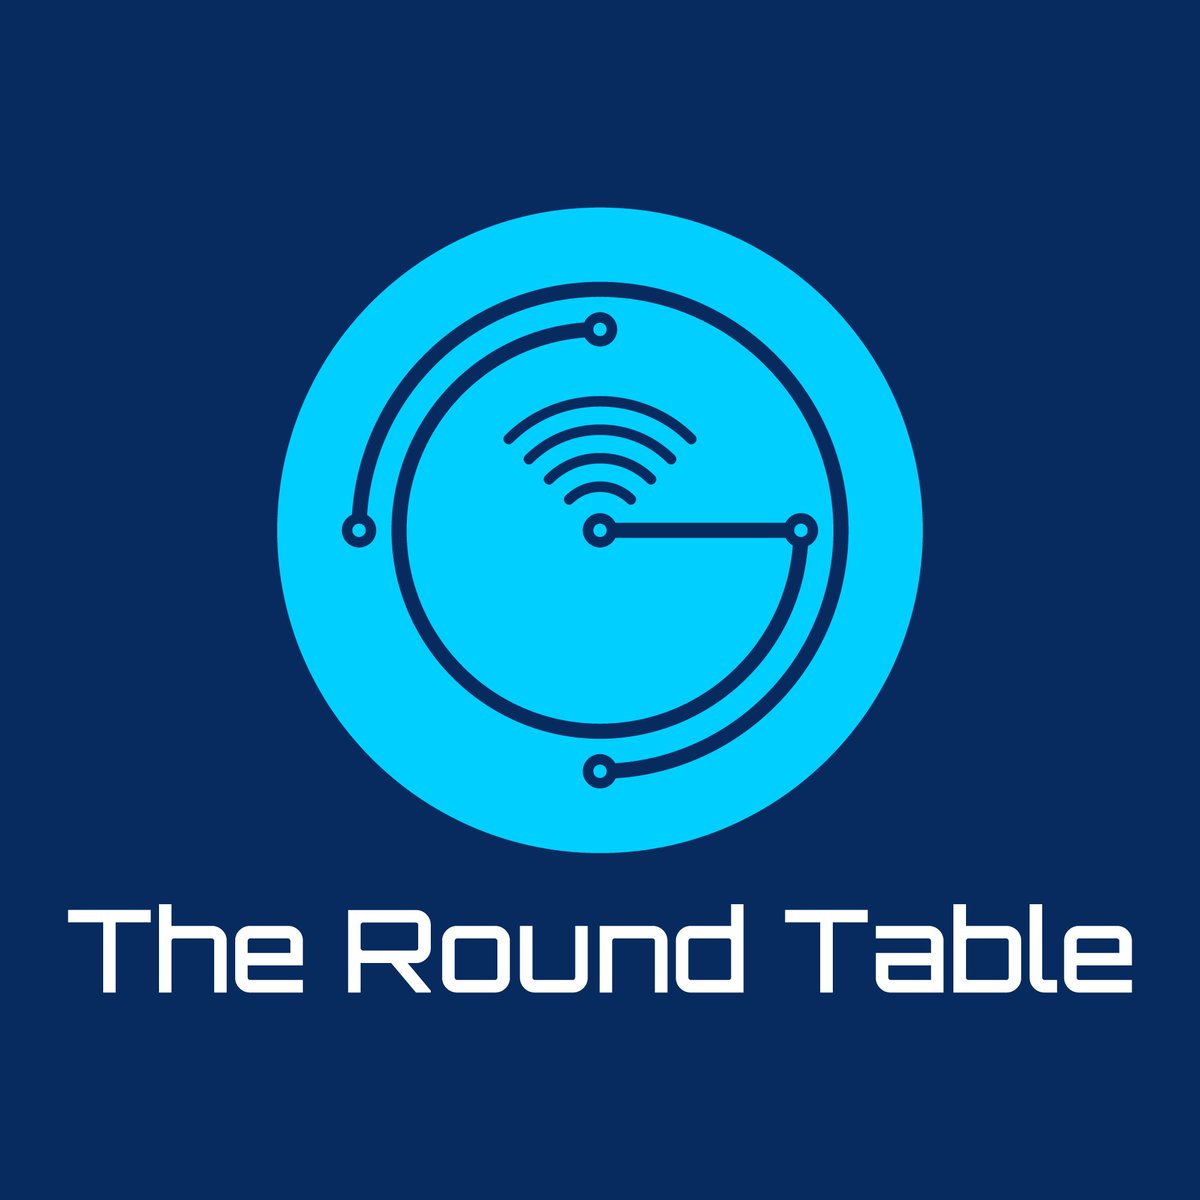 New #Youtube live talk show coming soon, The Round Table! Current looking for male co-host. If you're interested please contact us!